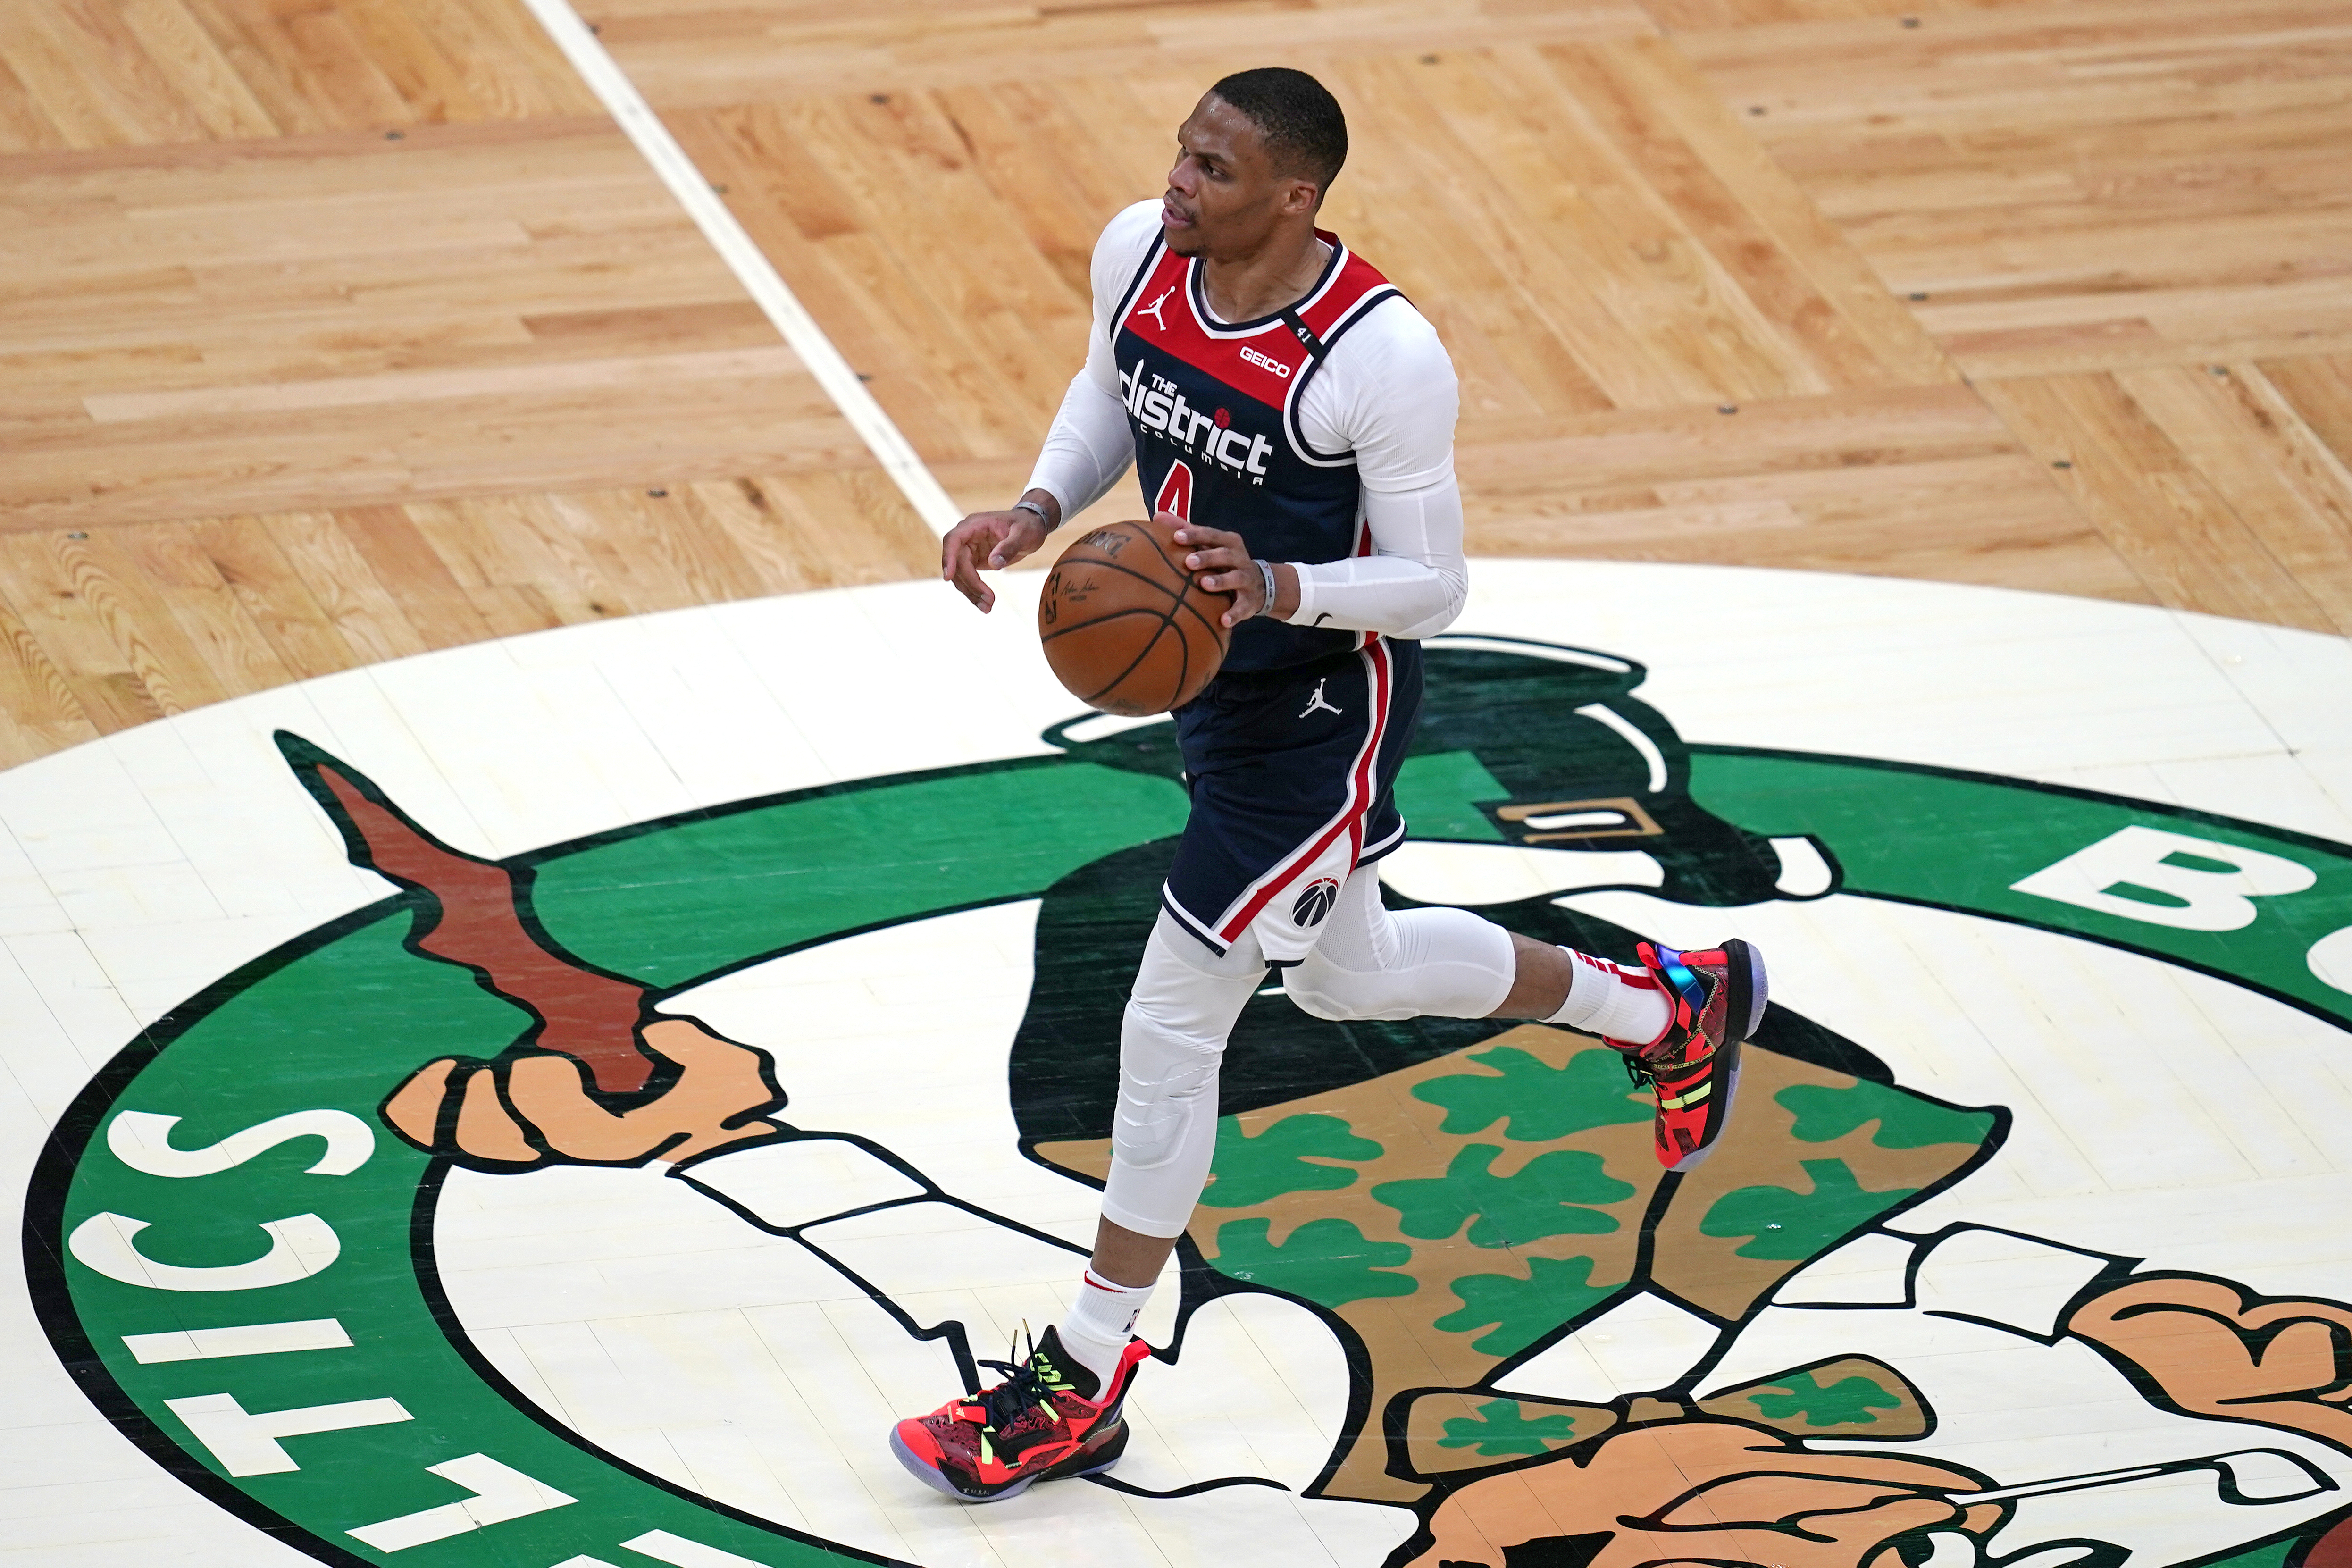 Russell Westbrook Honored, Wizards Clinch First Postseason Berth